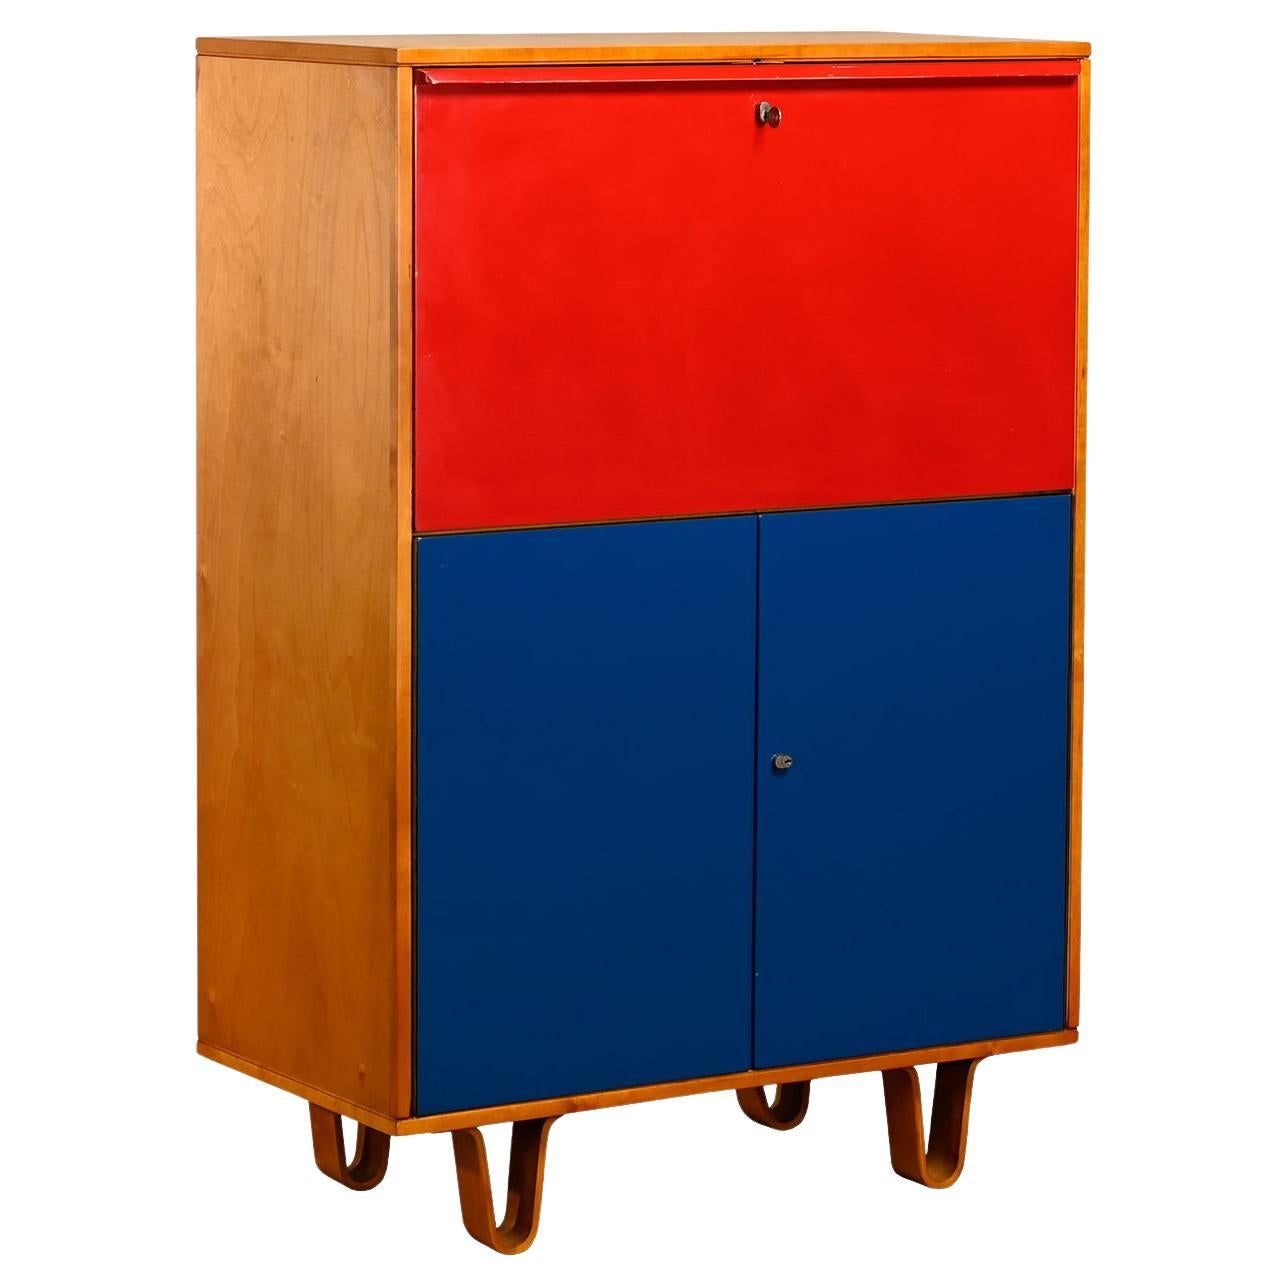 Cees Braakman CB07 Secretaire in Birch red / blue plywood for Pastoe Netherlands For Sale